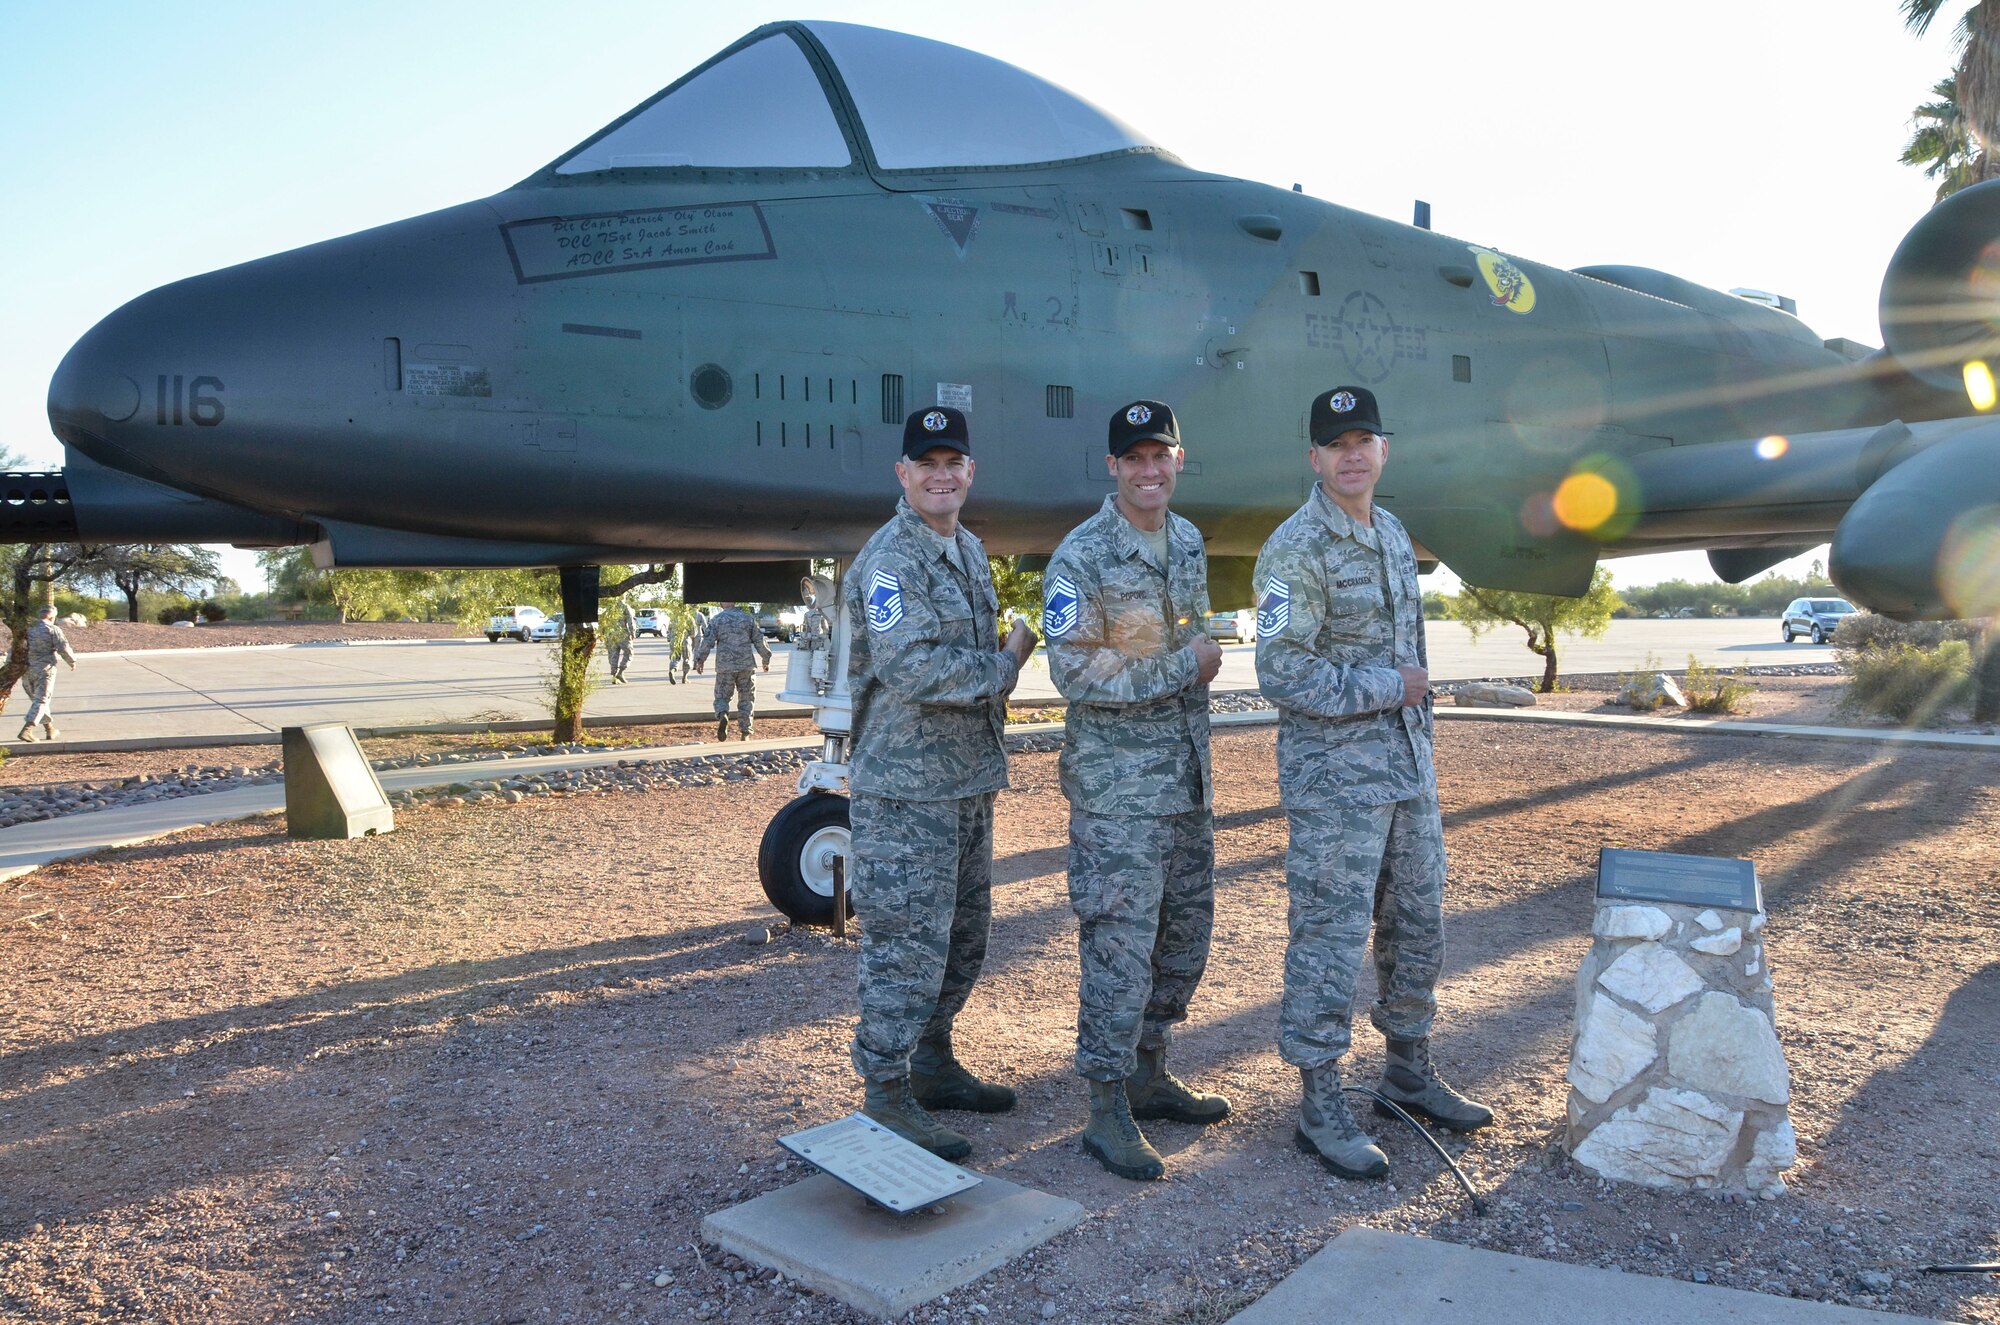 Senior Master Sgt’s. Kevin Wendt, Todd Popovic and Brett McCracken pose for a photo after being congratulated by both NAF and Wing leadership for their selection to the rank of Chief Master Sergeant at Davis-Monthan AFB, Ariz., Nov. 14, 2013. The rank of Chief Master Sergeant is the highest Air Force enlisted rank and only one percent of Air Force enlisted personnel can hold the grade of E9. Chief Master Sergeants must also exemplify the finest qualities of an Airman, while striving to further develop their leadership and management skills. (U.S. Air Force photo by Staff Sgt. Adam Grant/released)